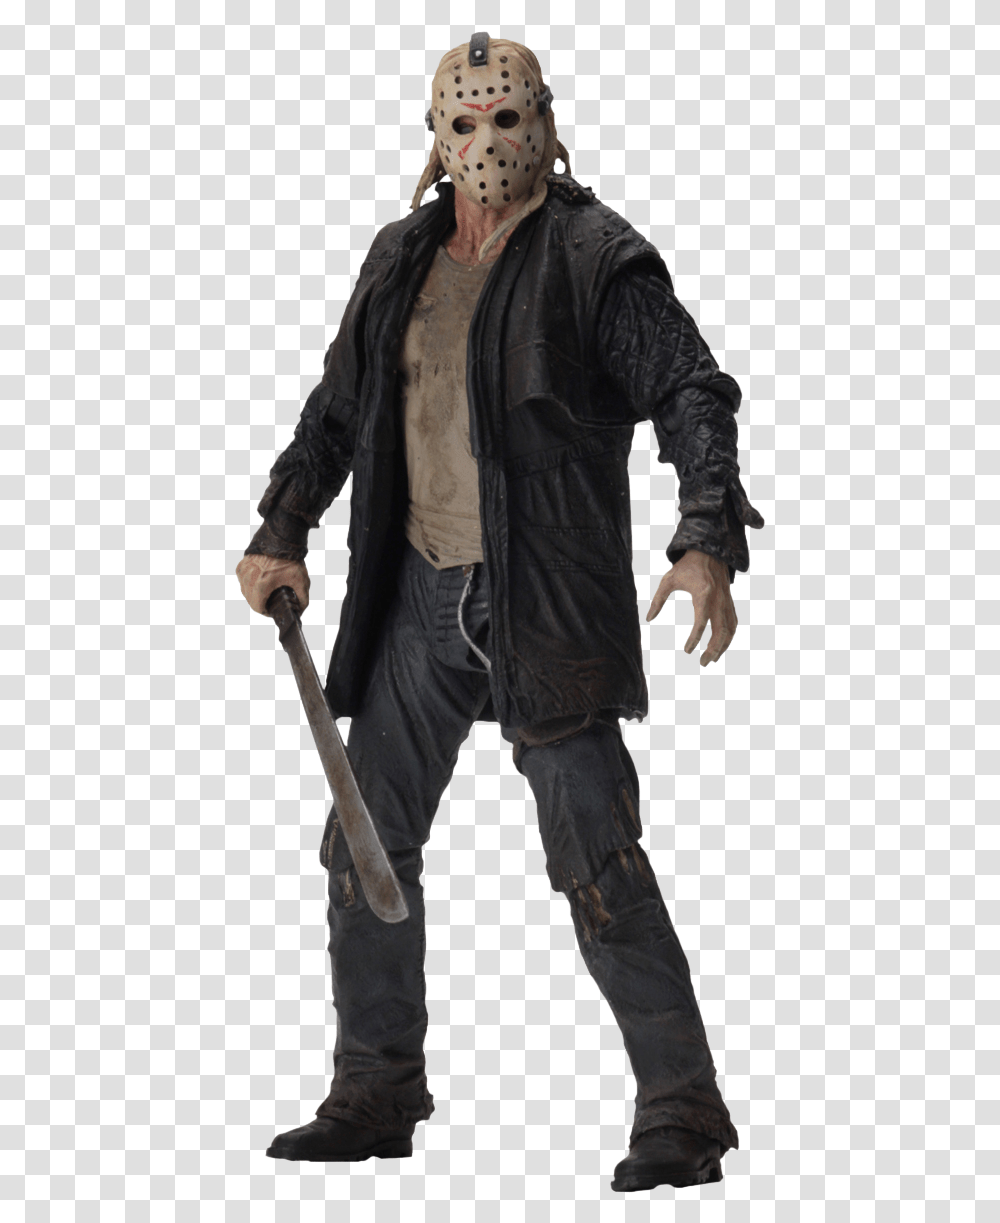 Friday The 13th Ultimate Jason Voorhees 7 Inch Figure, Apparel, Jacket, Coat Transparent Png